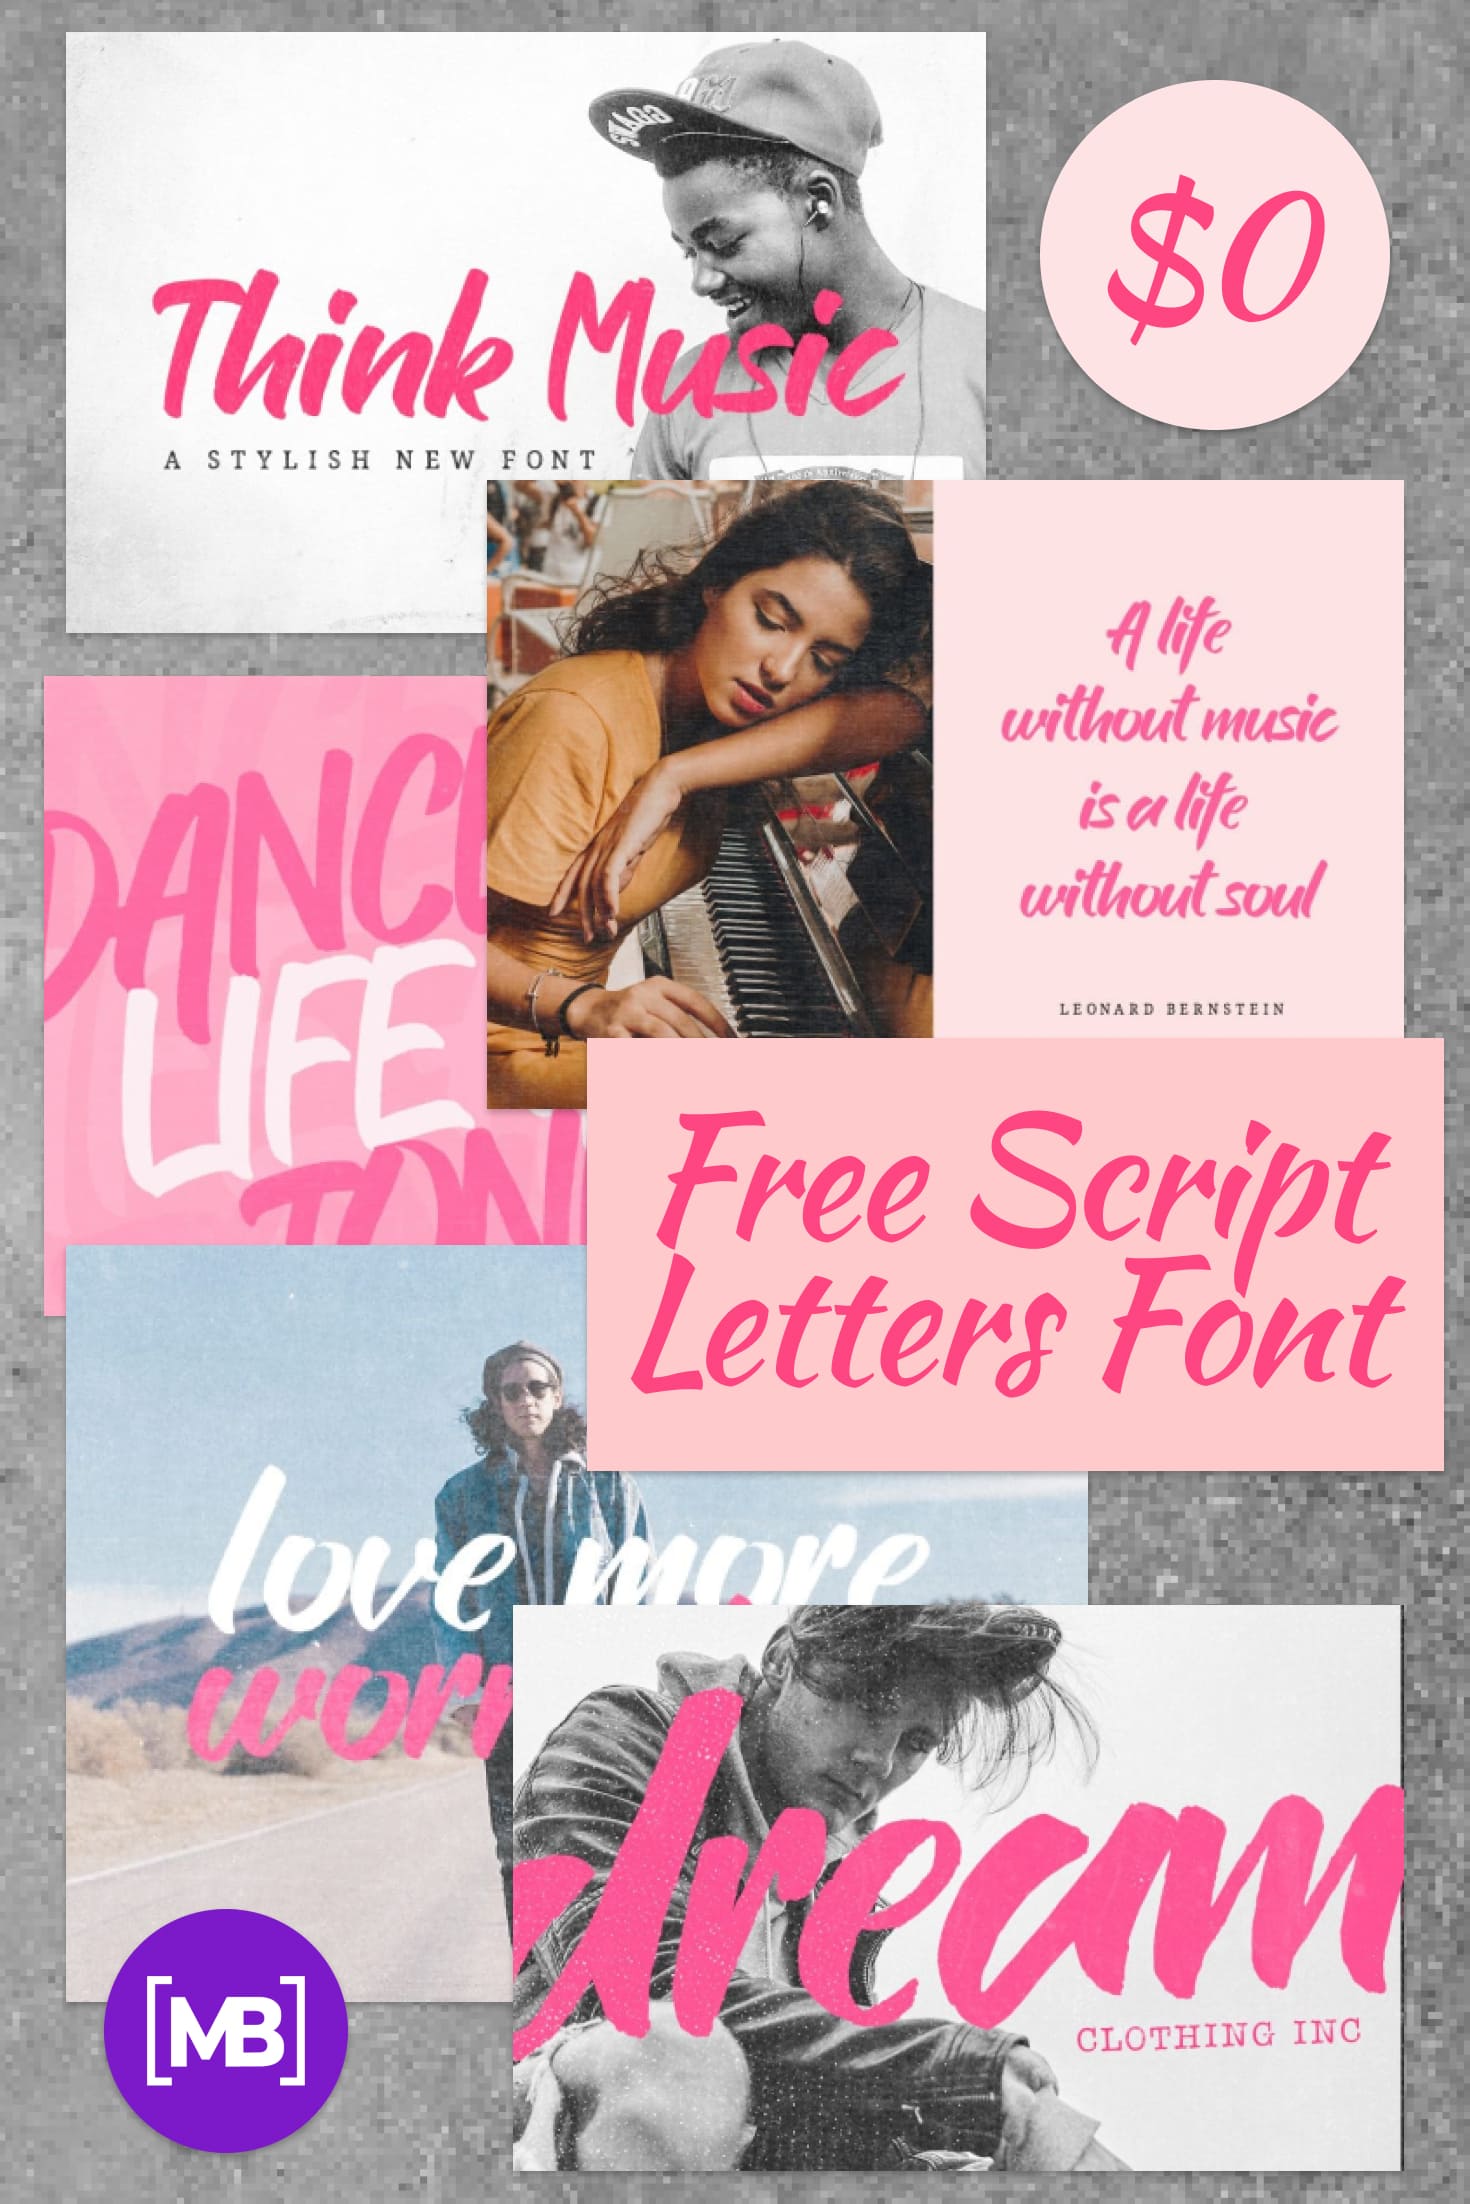 Pinterest Image: Free Script Letters Font: Think Music Thick Brush Typeface.